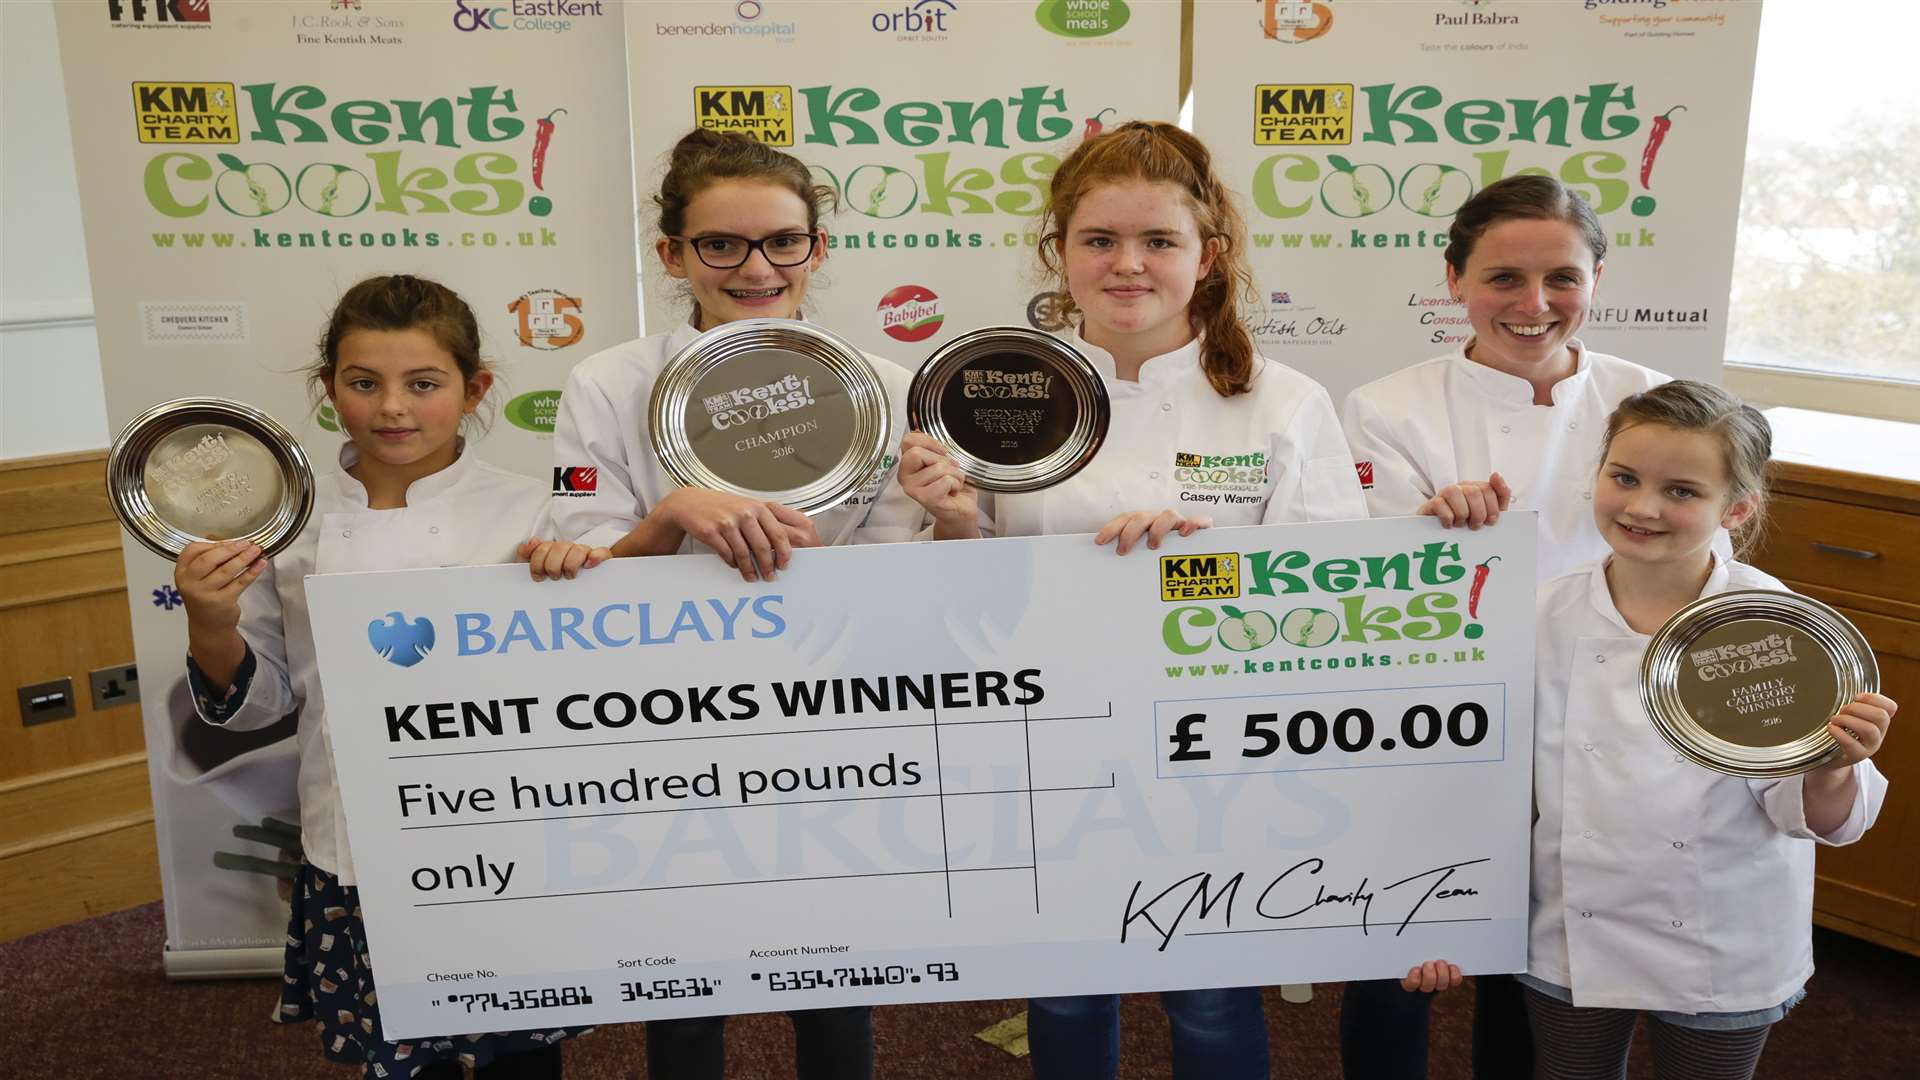 Last year's Kent Cooks winners with their prize cheque. from left, Isobella McAuley, Olivia Lowe, Casey Warren, Stephanie and Lucy Corlett.